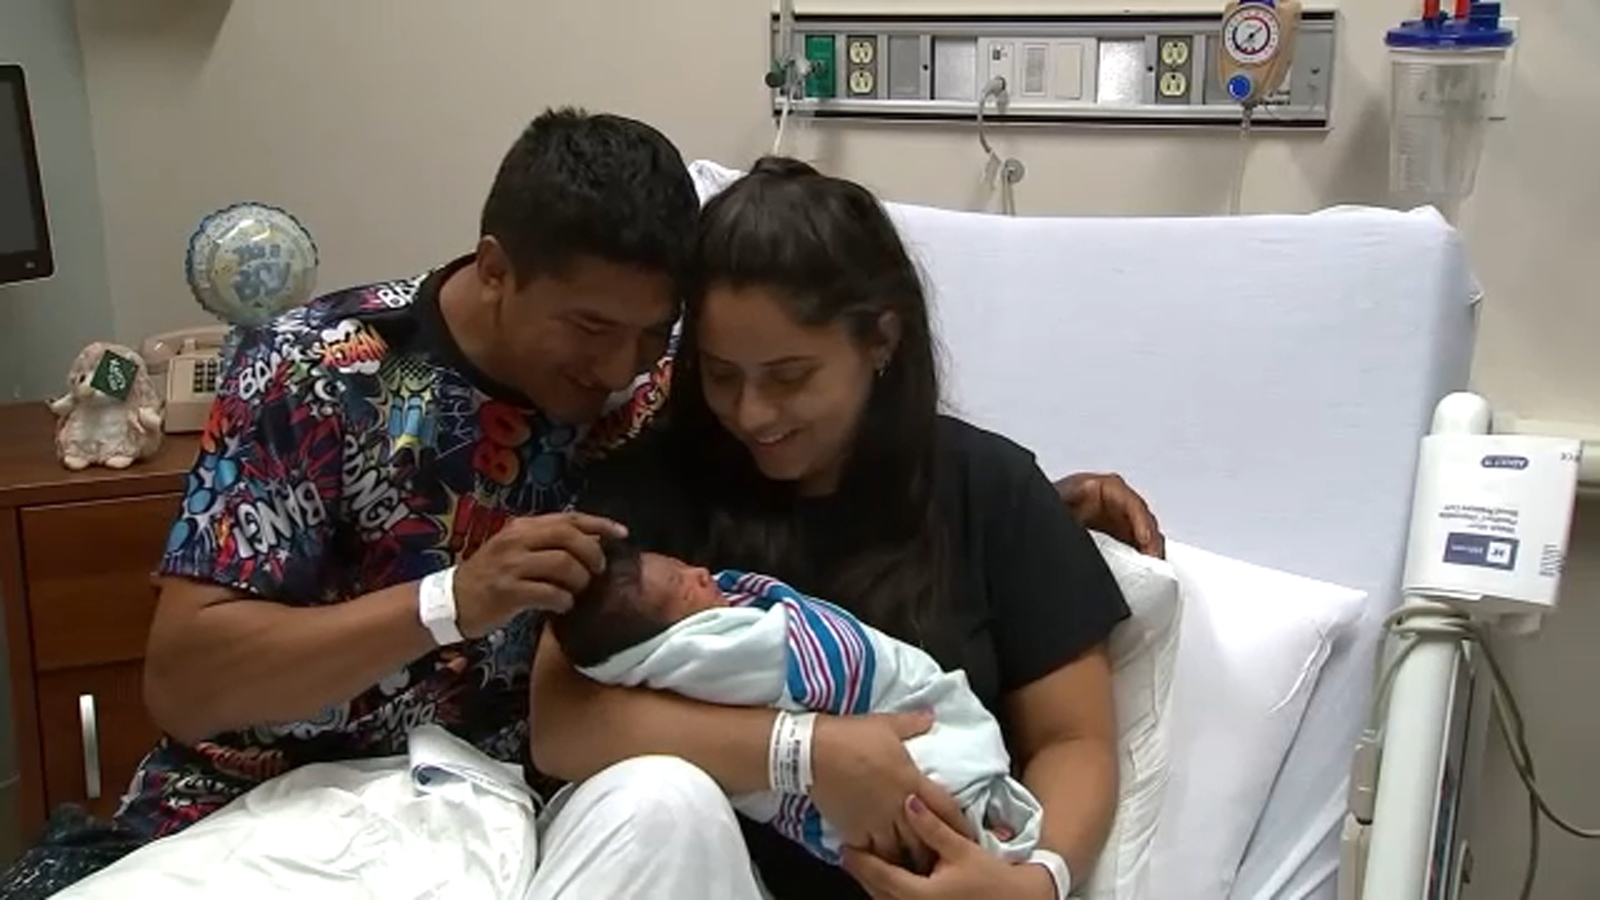 Officers reunite with family after delivering baby boy outside Lincoln Tunnel